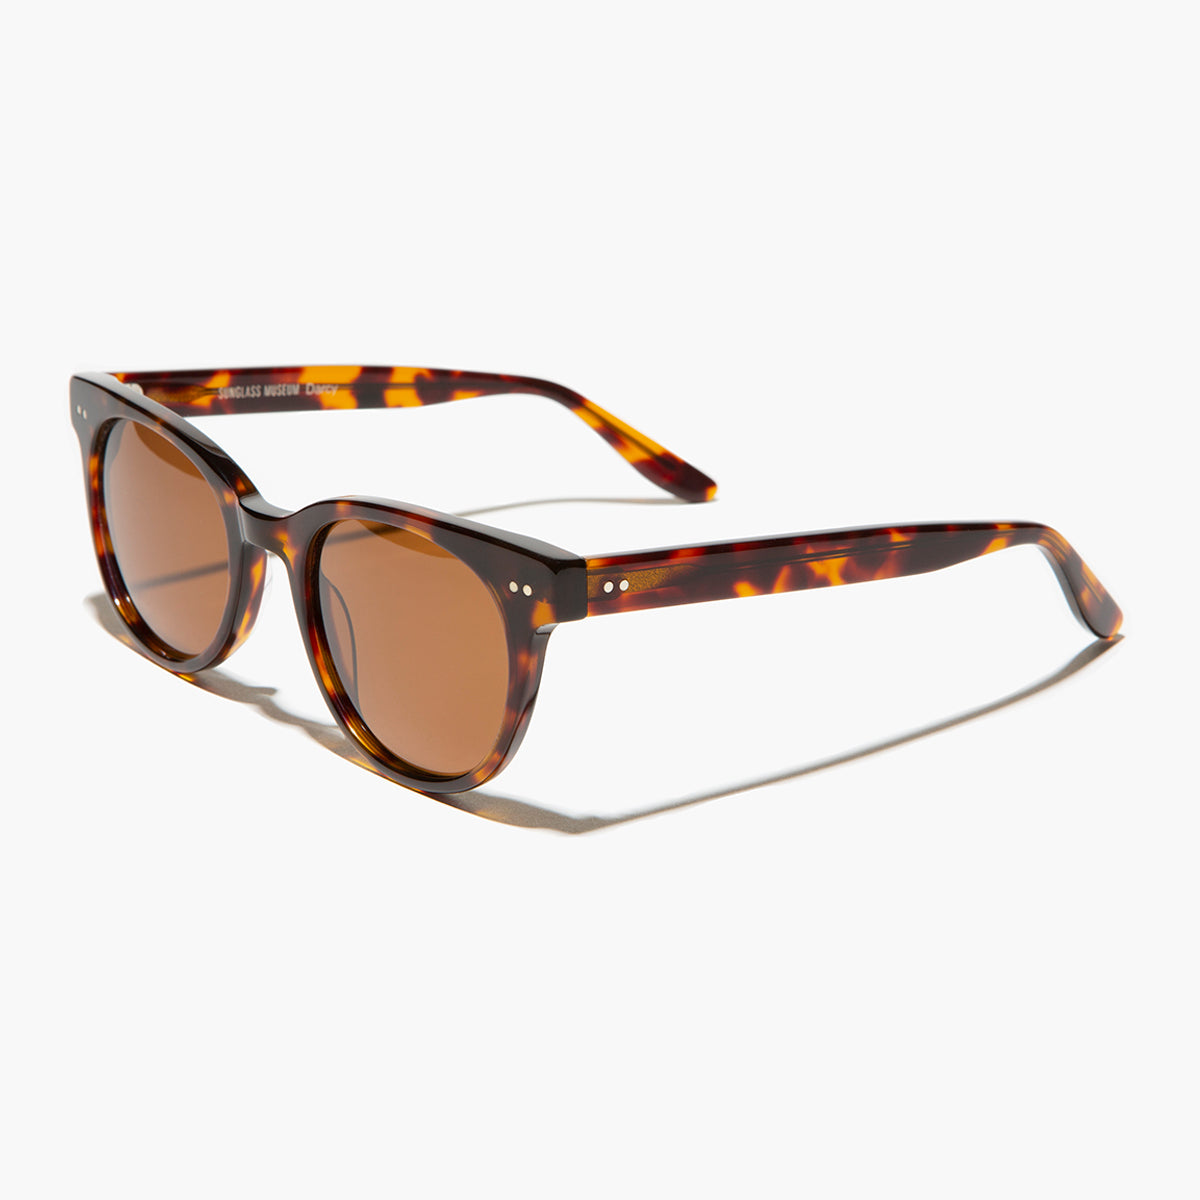 rounded square retro sunglass with polarized lenses